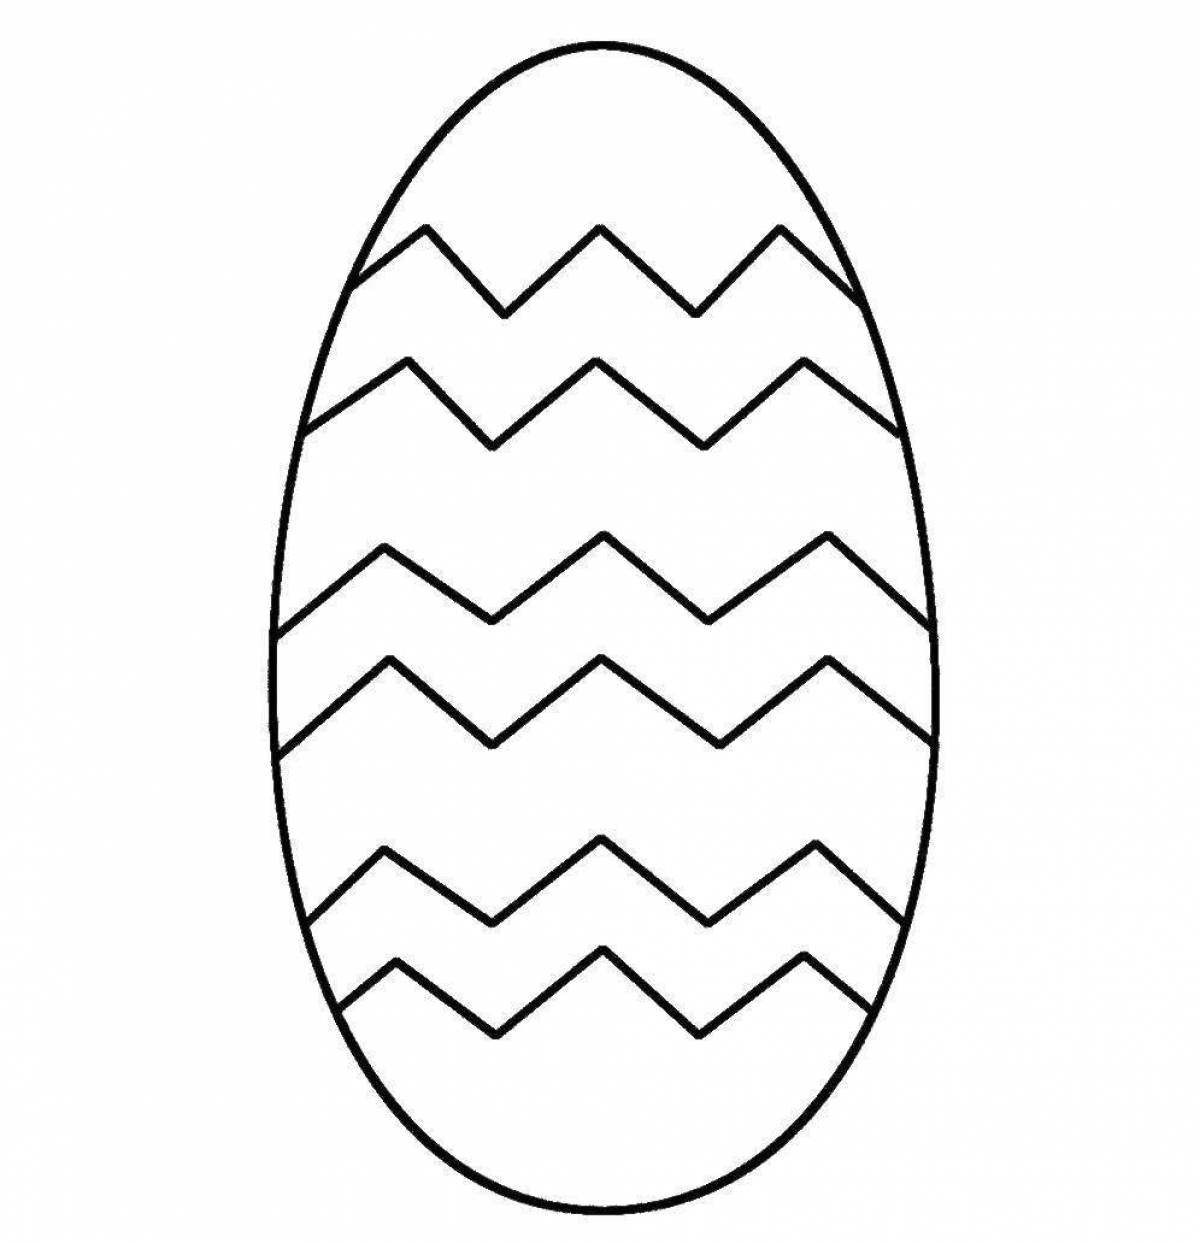 Coloring page dazzling golden egg